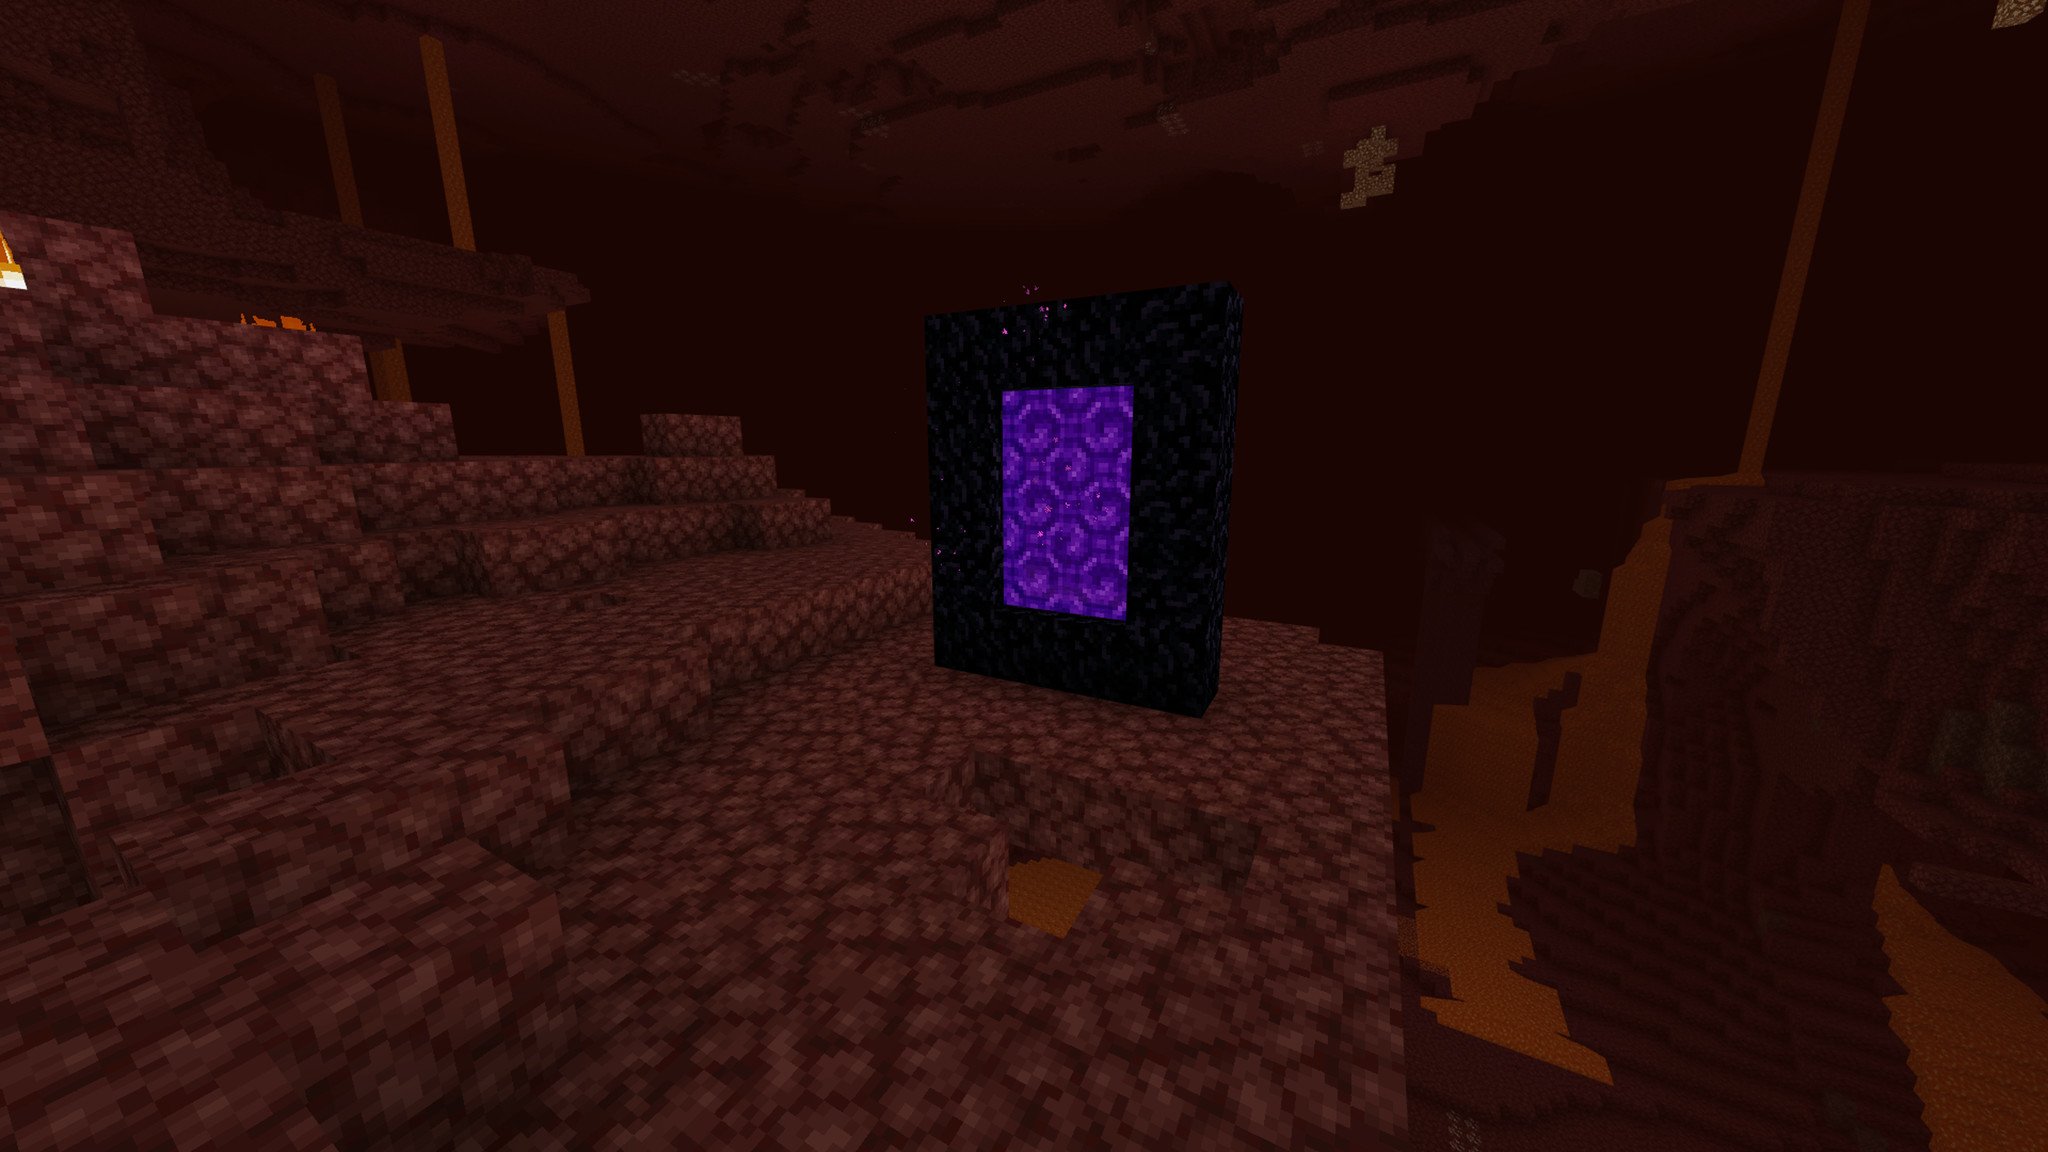 Back to the Nether